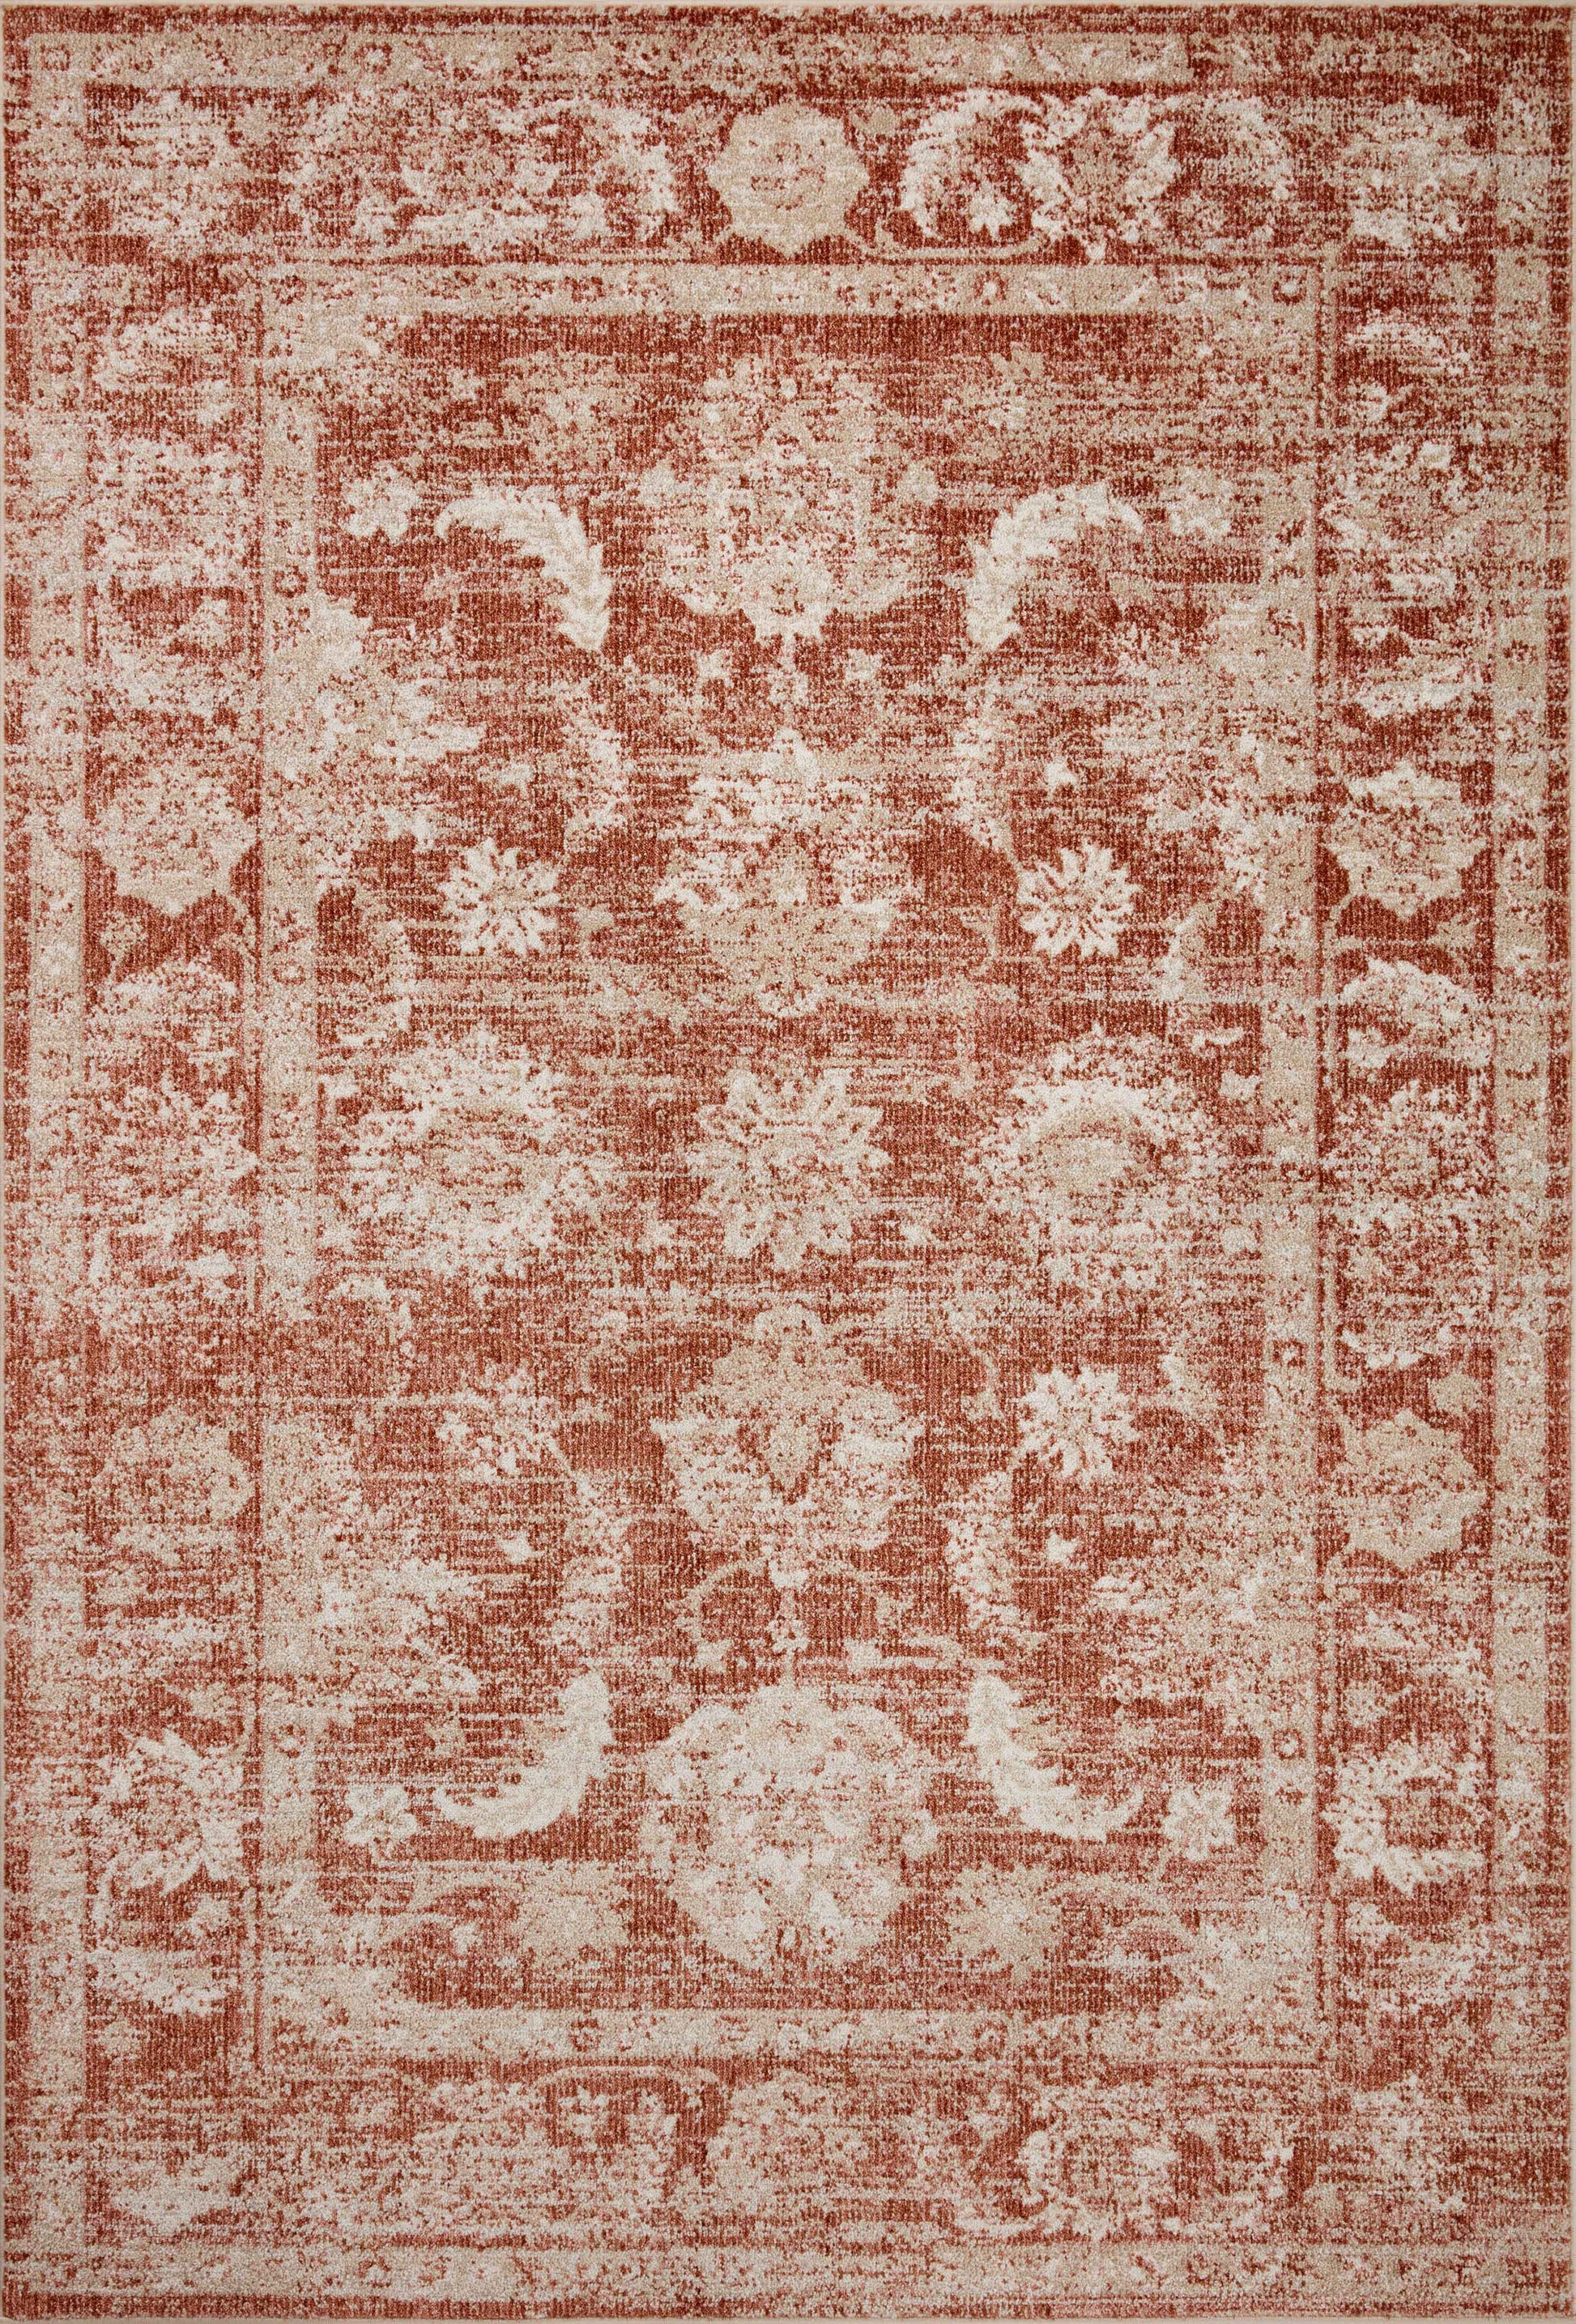 A picture of Loloi's Odette rug, in style ODT-03, color Rust / Ivory